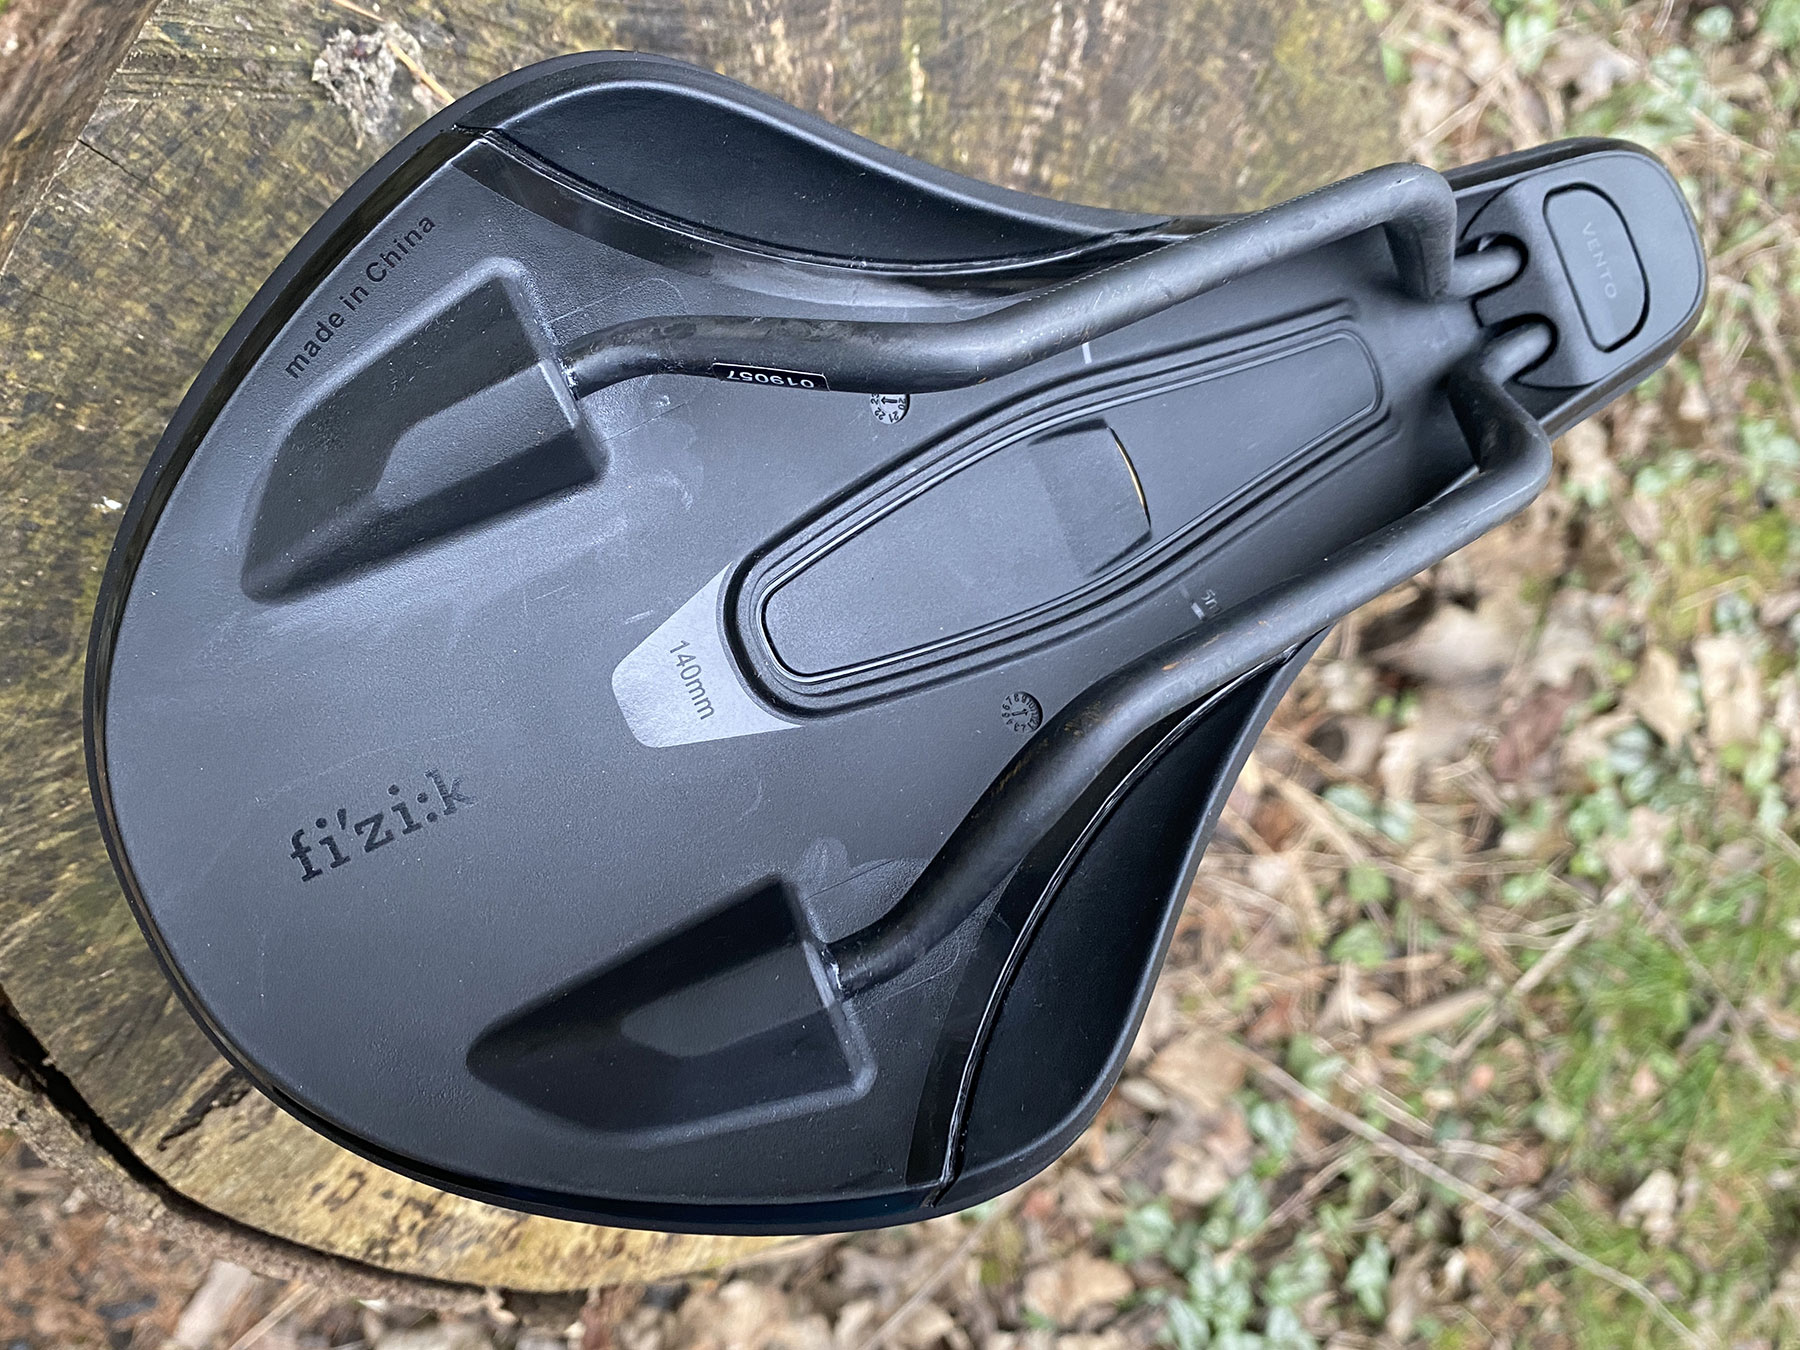 Fizik Vento Argo X1 off-road gravel racing saddle Review, new carbon rails upgrade, underside details, made in China